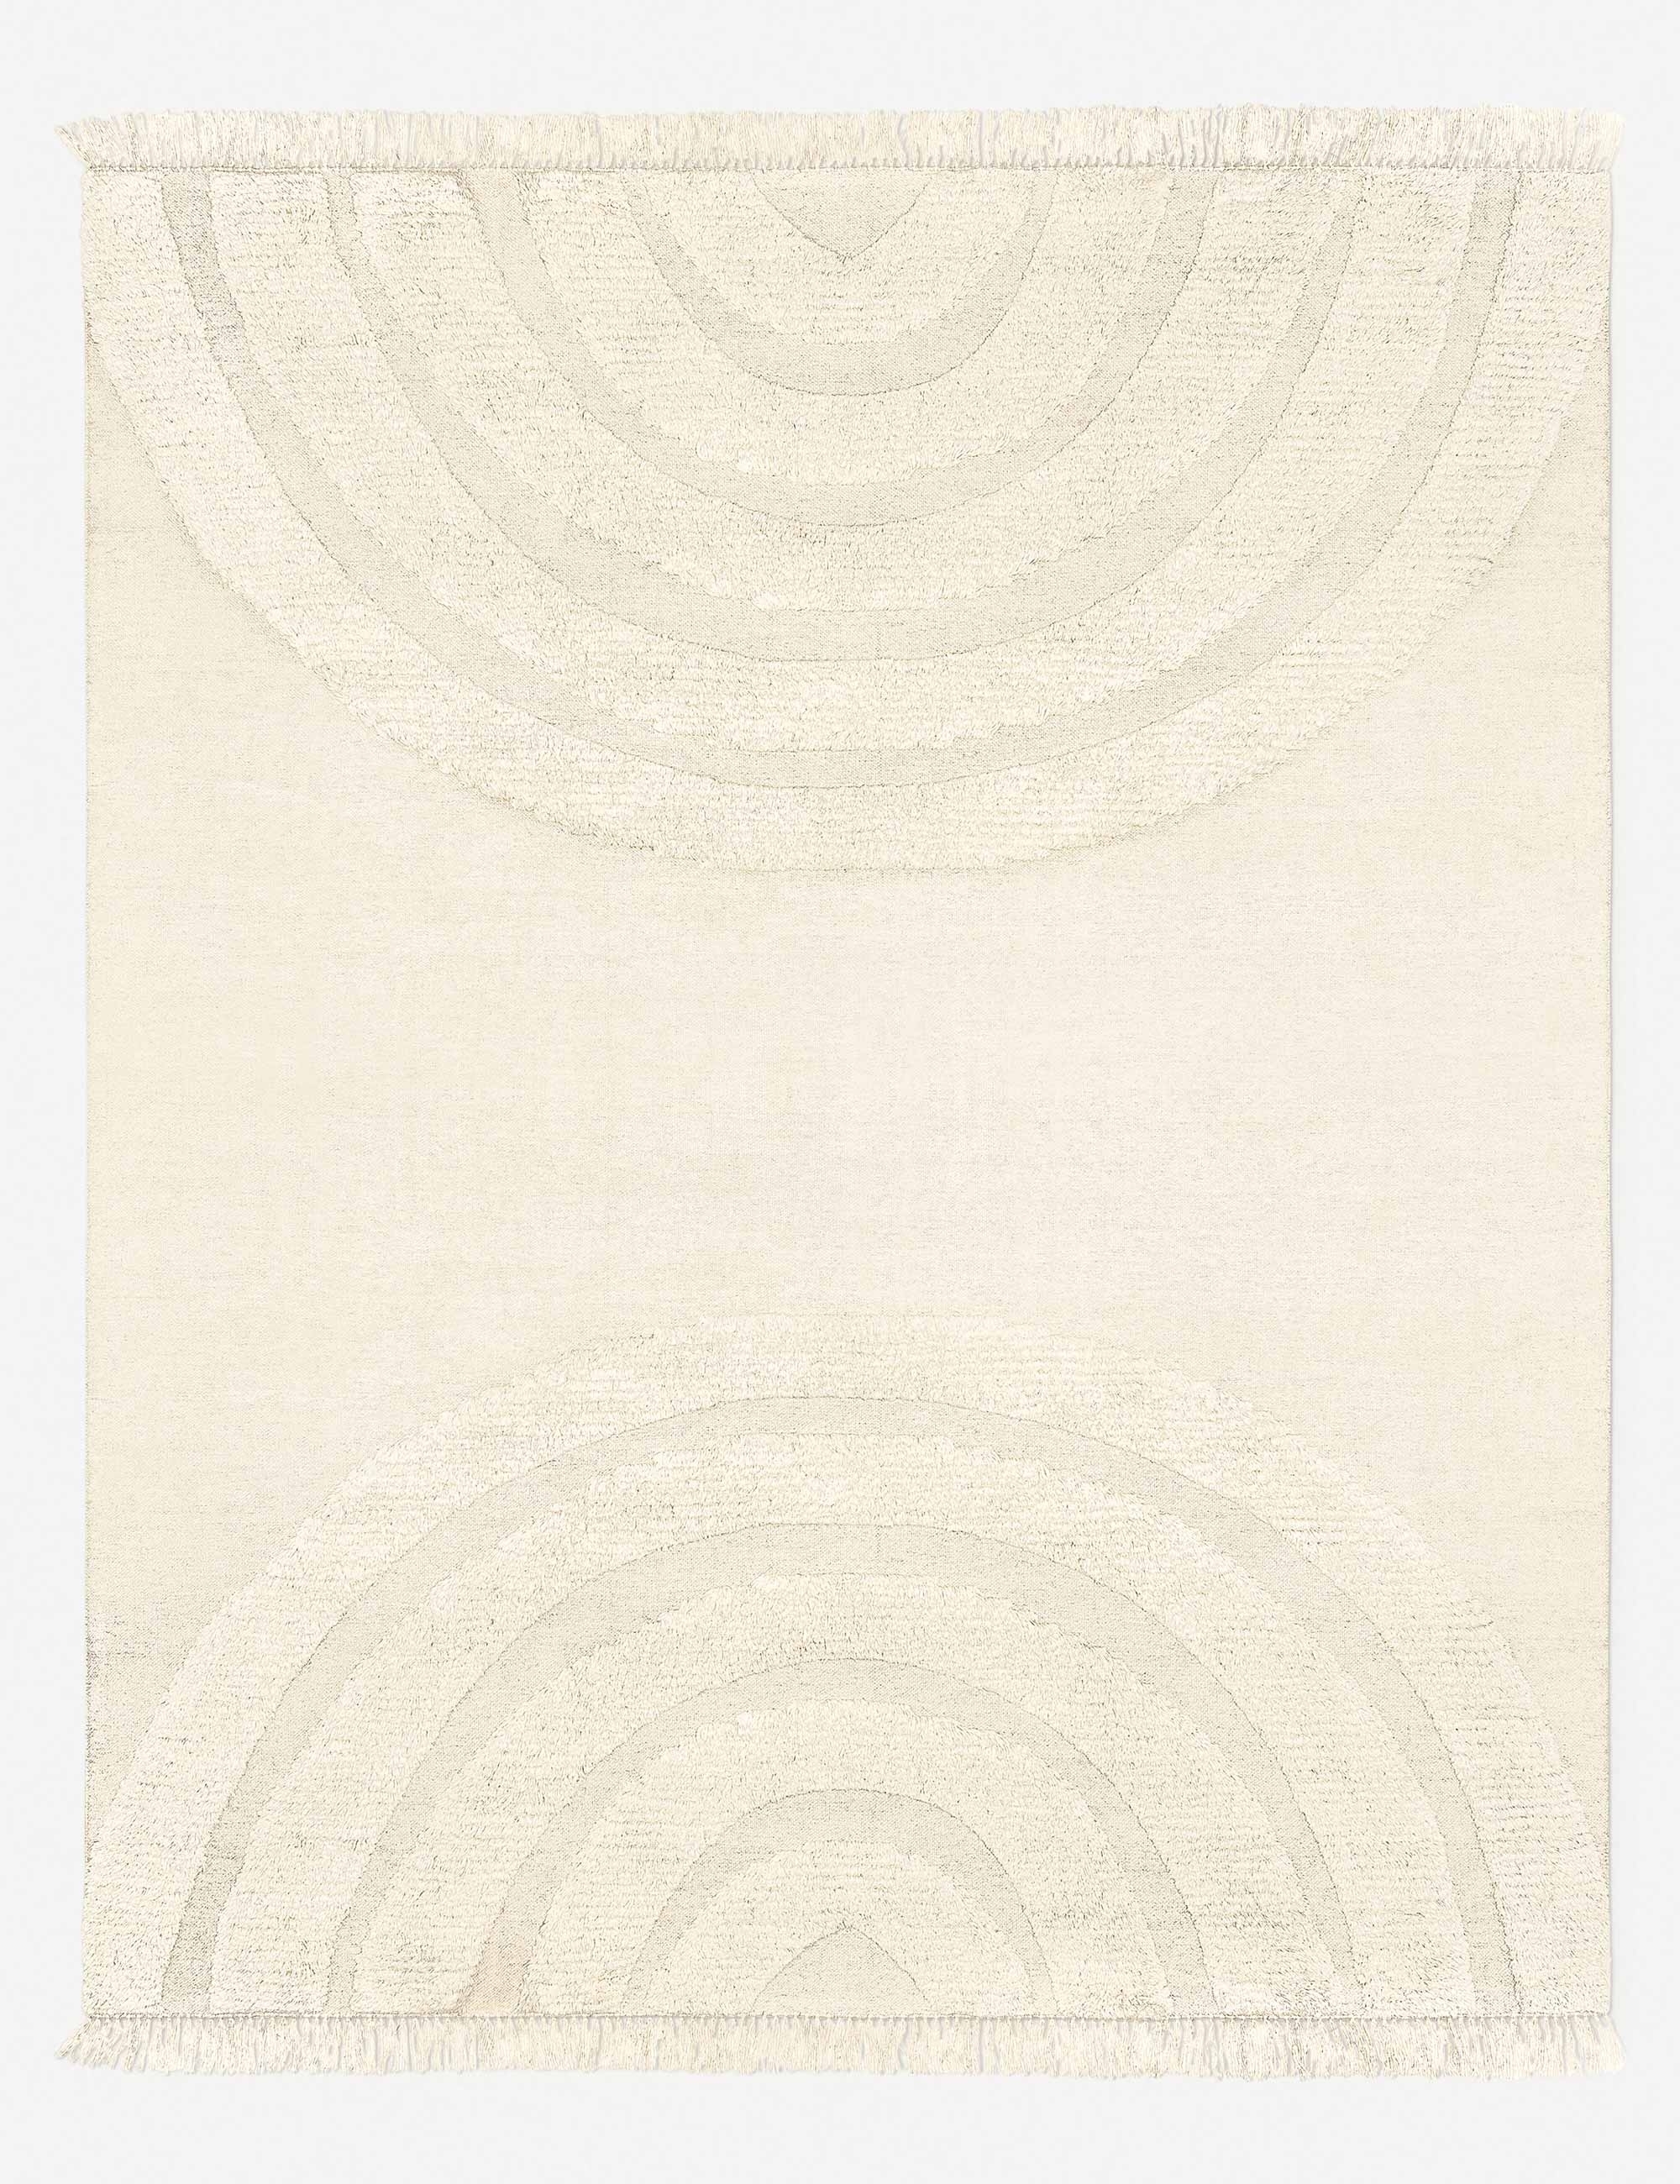 Arches Hand-Knotted Wool Rug by Sarah Sherman Samuel - Image 16